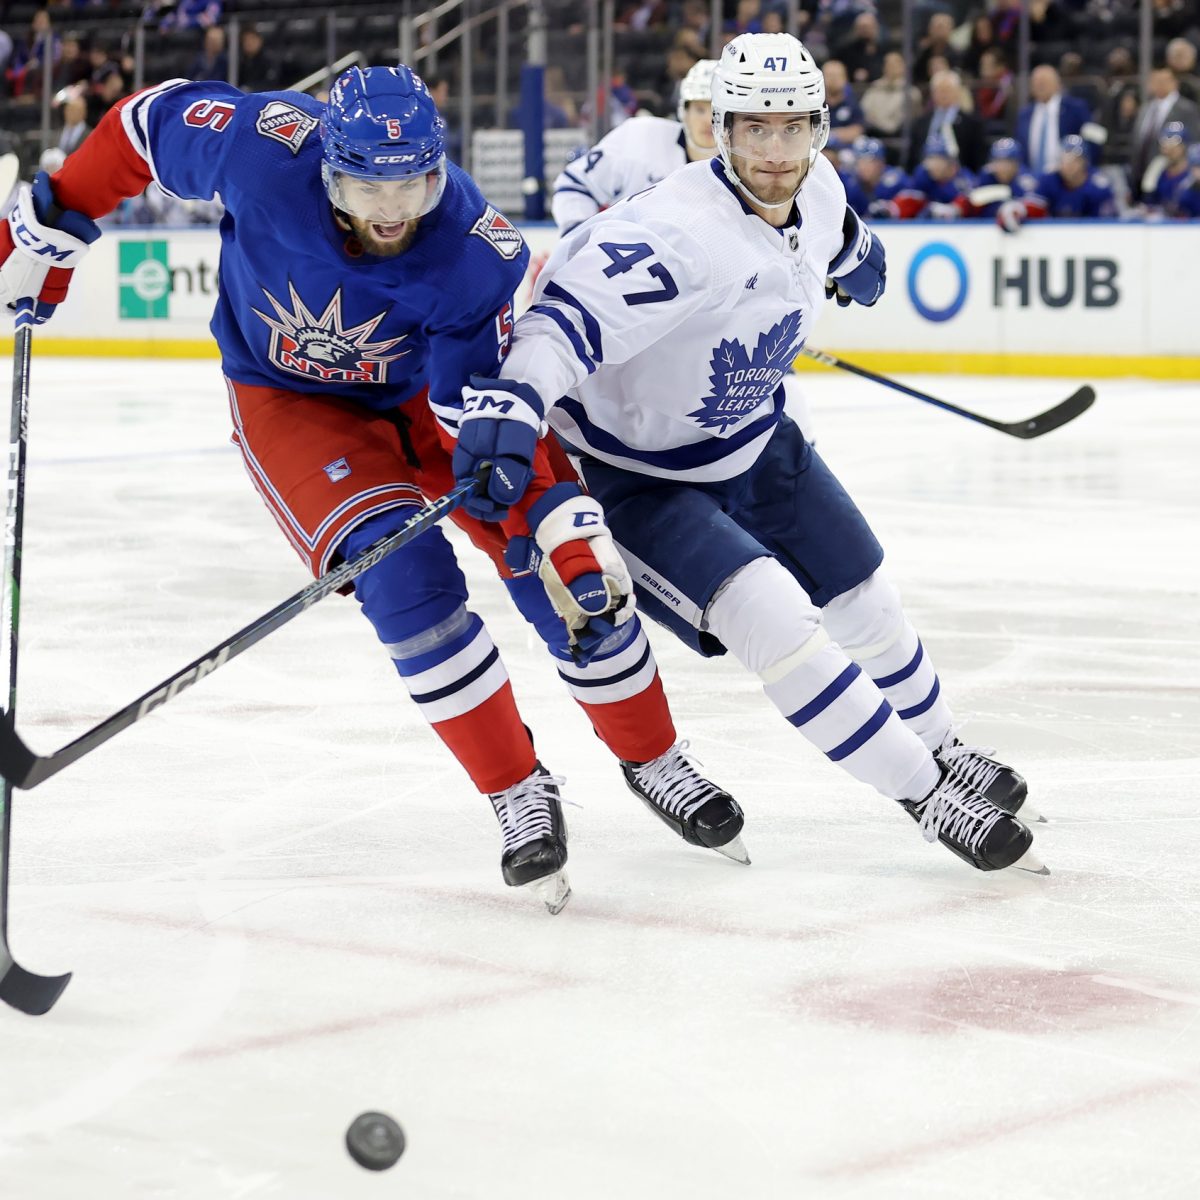 N.Y. Rangers vs. Toronto Maple Leafs Prediction, Preview, and Odds - 1-25-2023